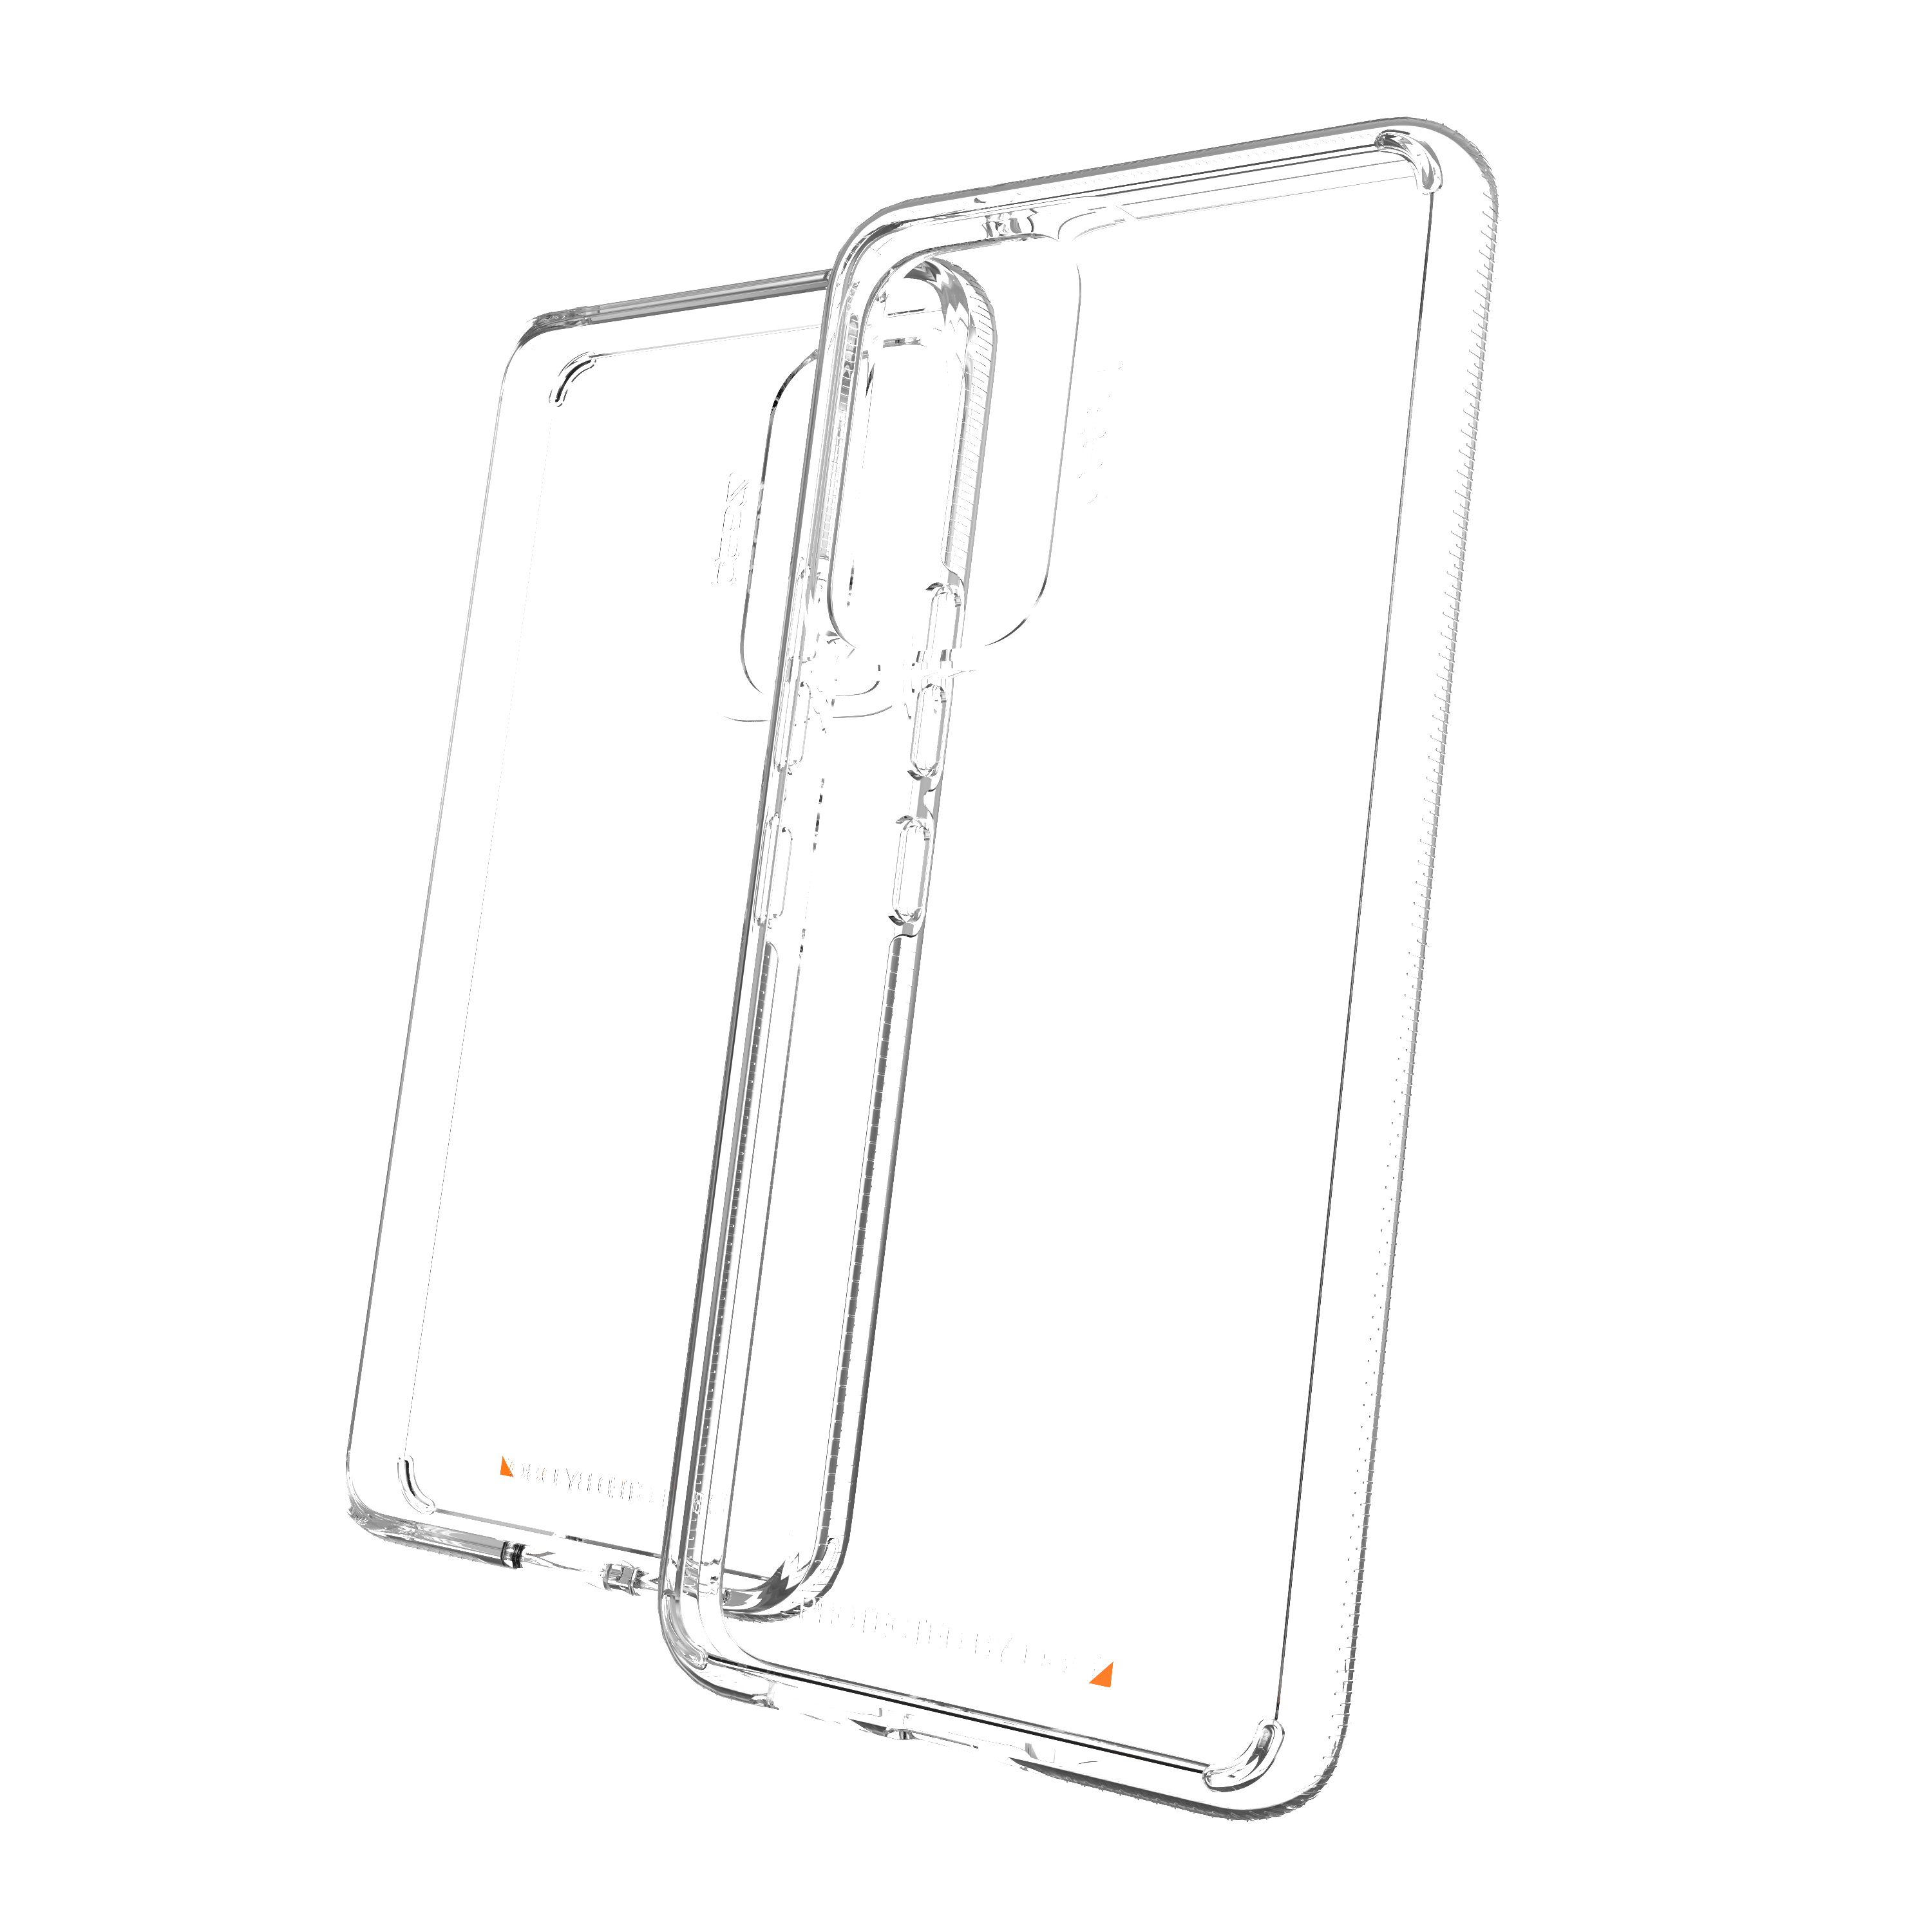 Transparent Palace, 5G, A53 Crystal Galaxy GEAR4 Bookcover, Samsung,